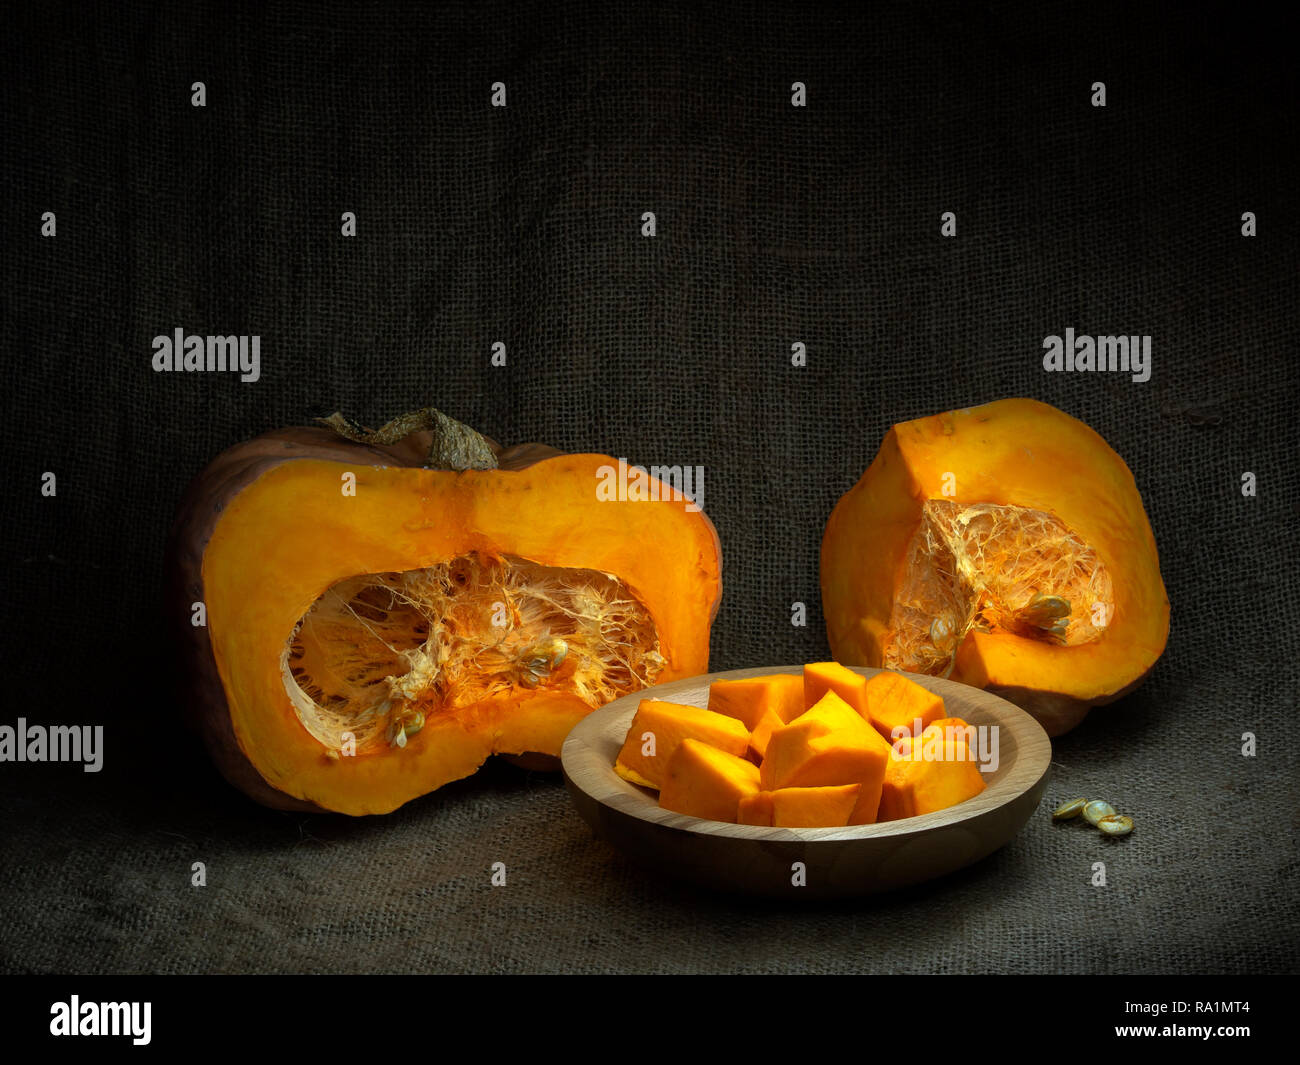 Acorn winter squash, pumpkin, prepared for cooking, cubes with seeds. Life cycle concept. Chiaroscuro, baroque style light painting. Stock Photo